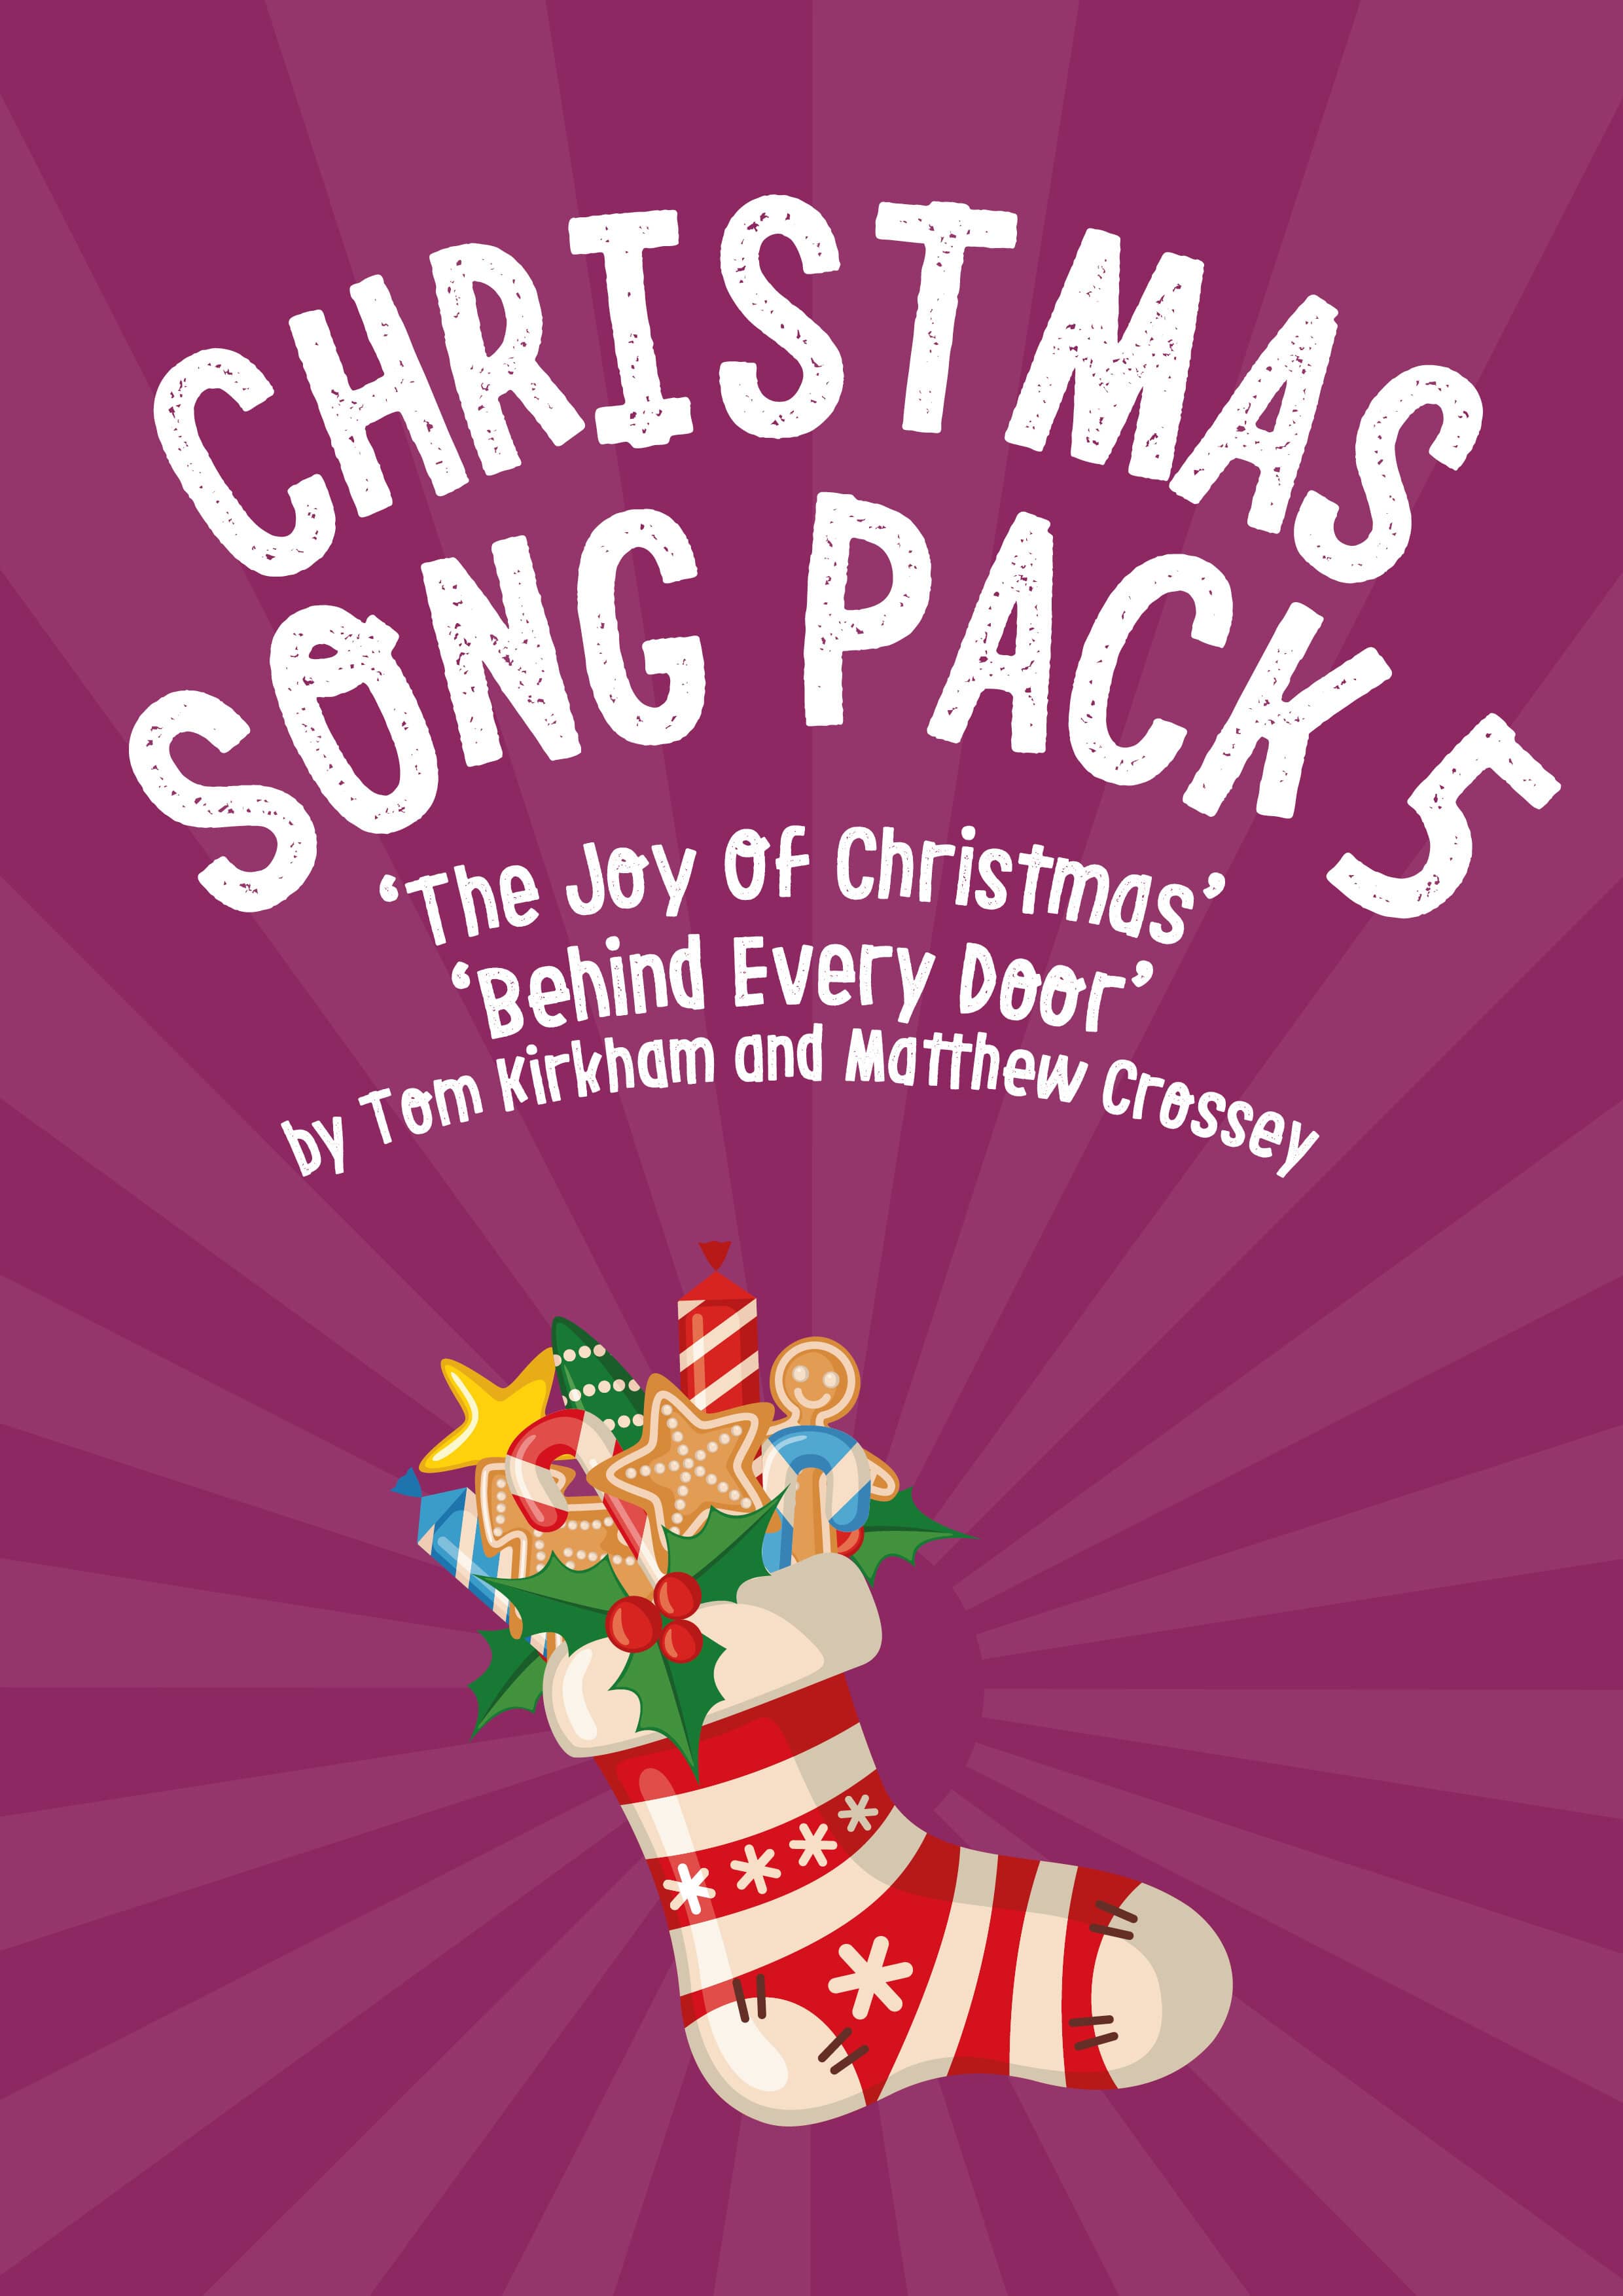 Christmas Songs Download Pack 5 - 100% discount with code CHRISTMAS5